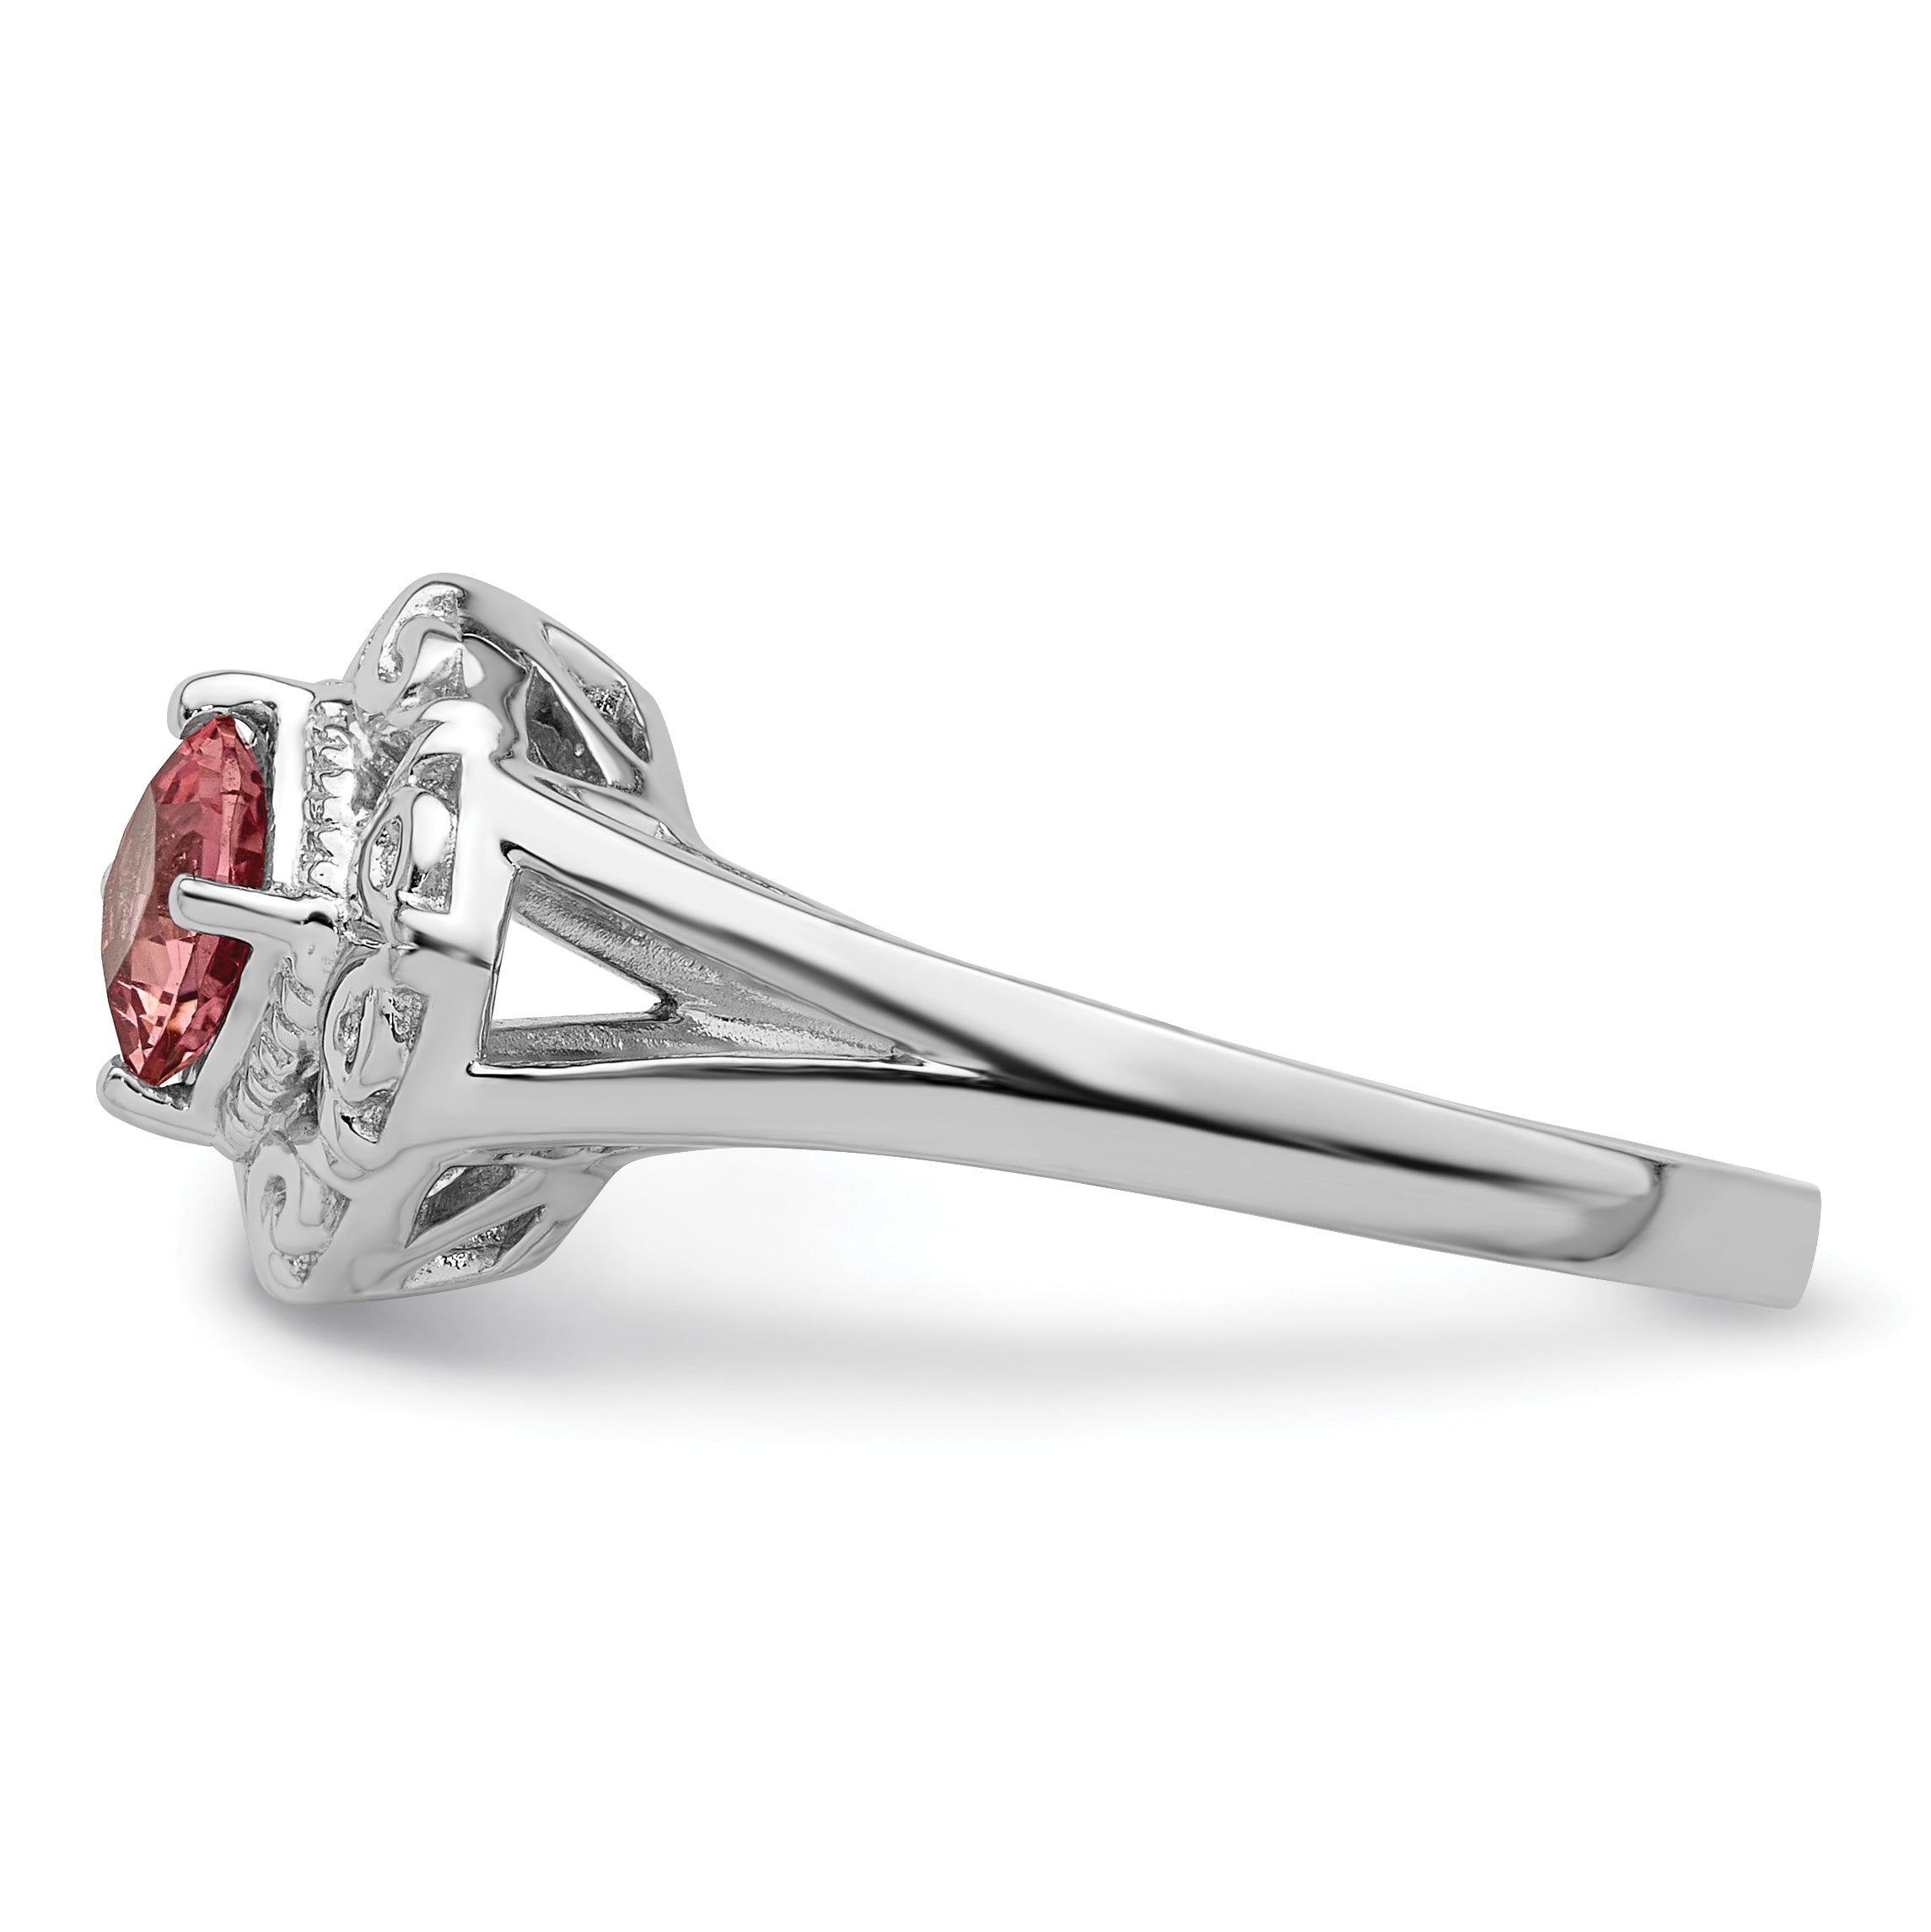 Sterling Silver Rhodium-plated Pink Tourmaline Ring